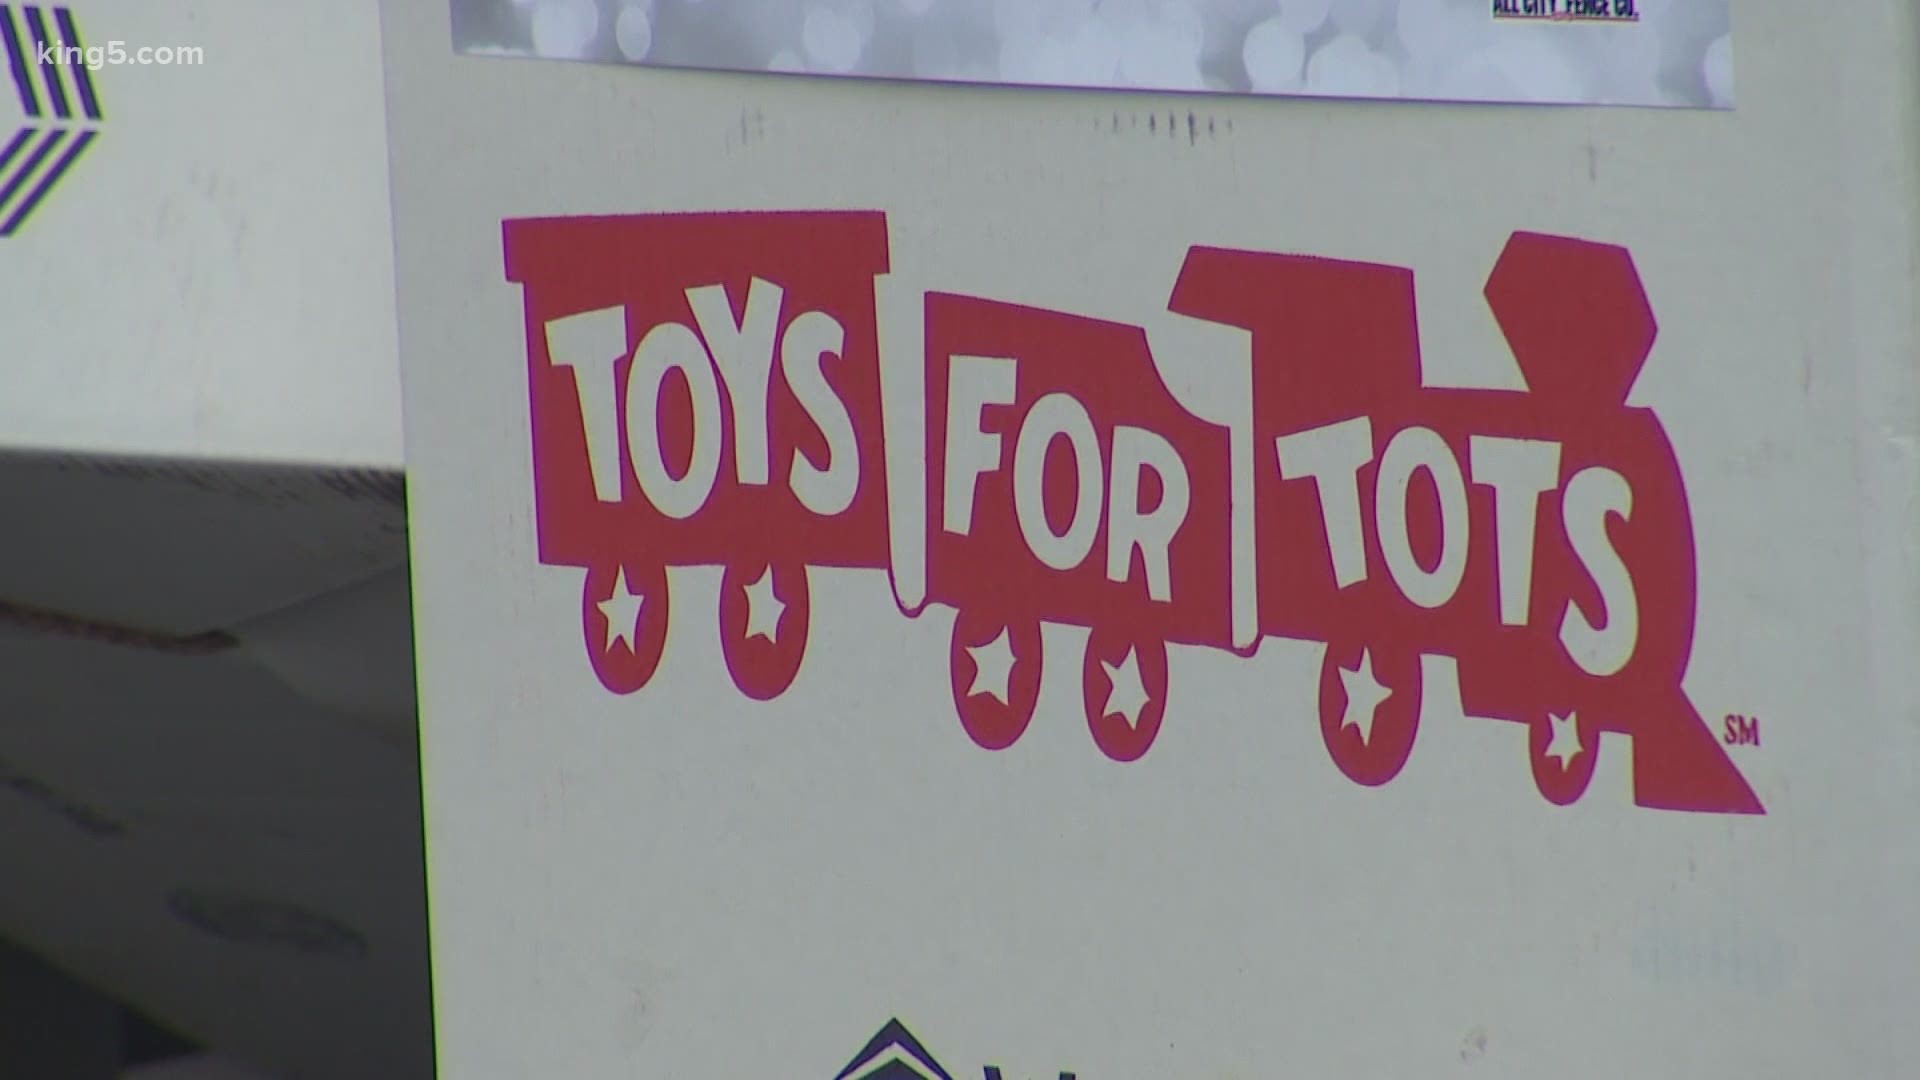 This year, the organization is trying to help 55,000 to 60,000 children with toys and they’re not even close to that goal.